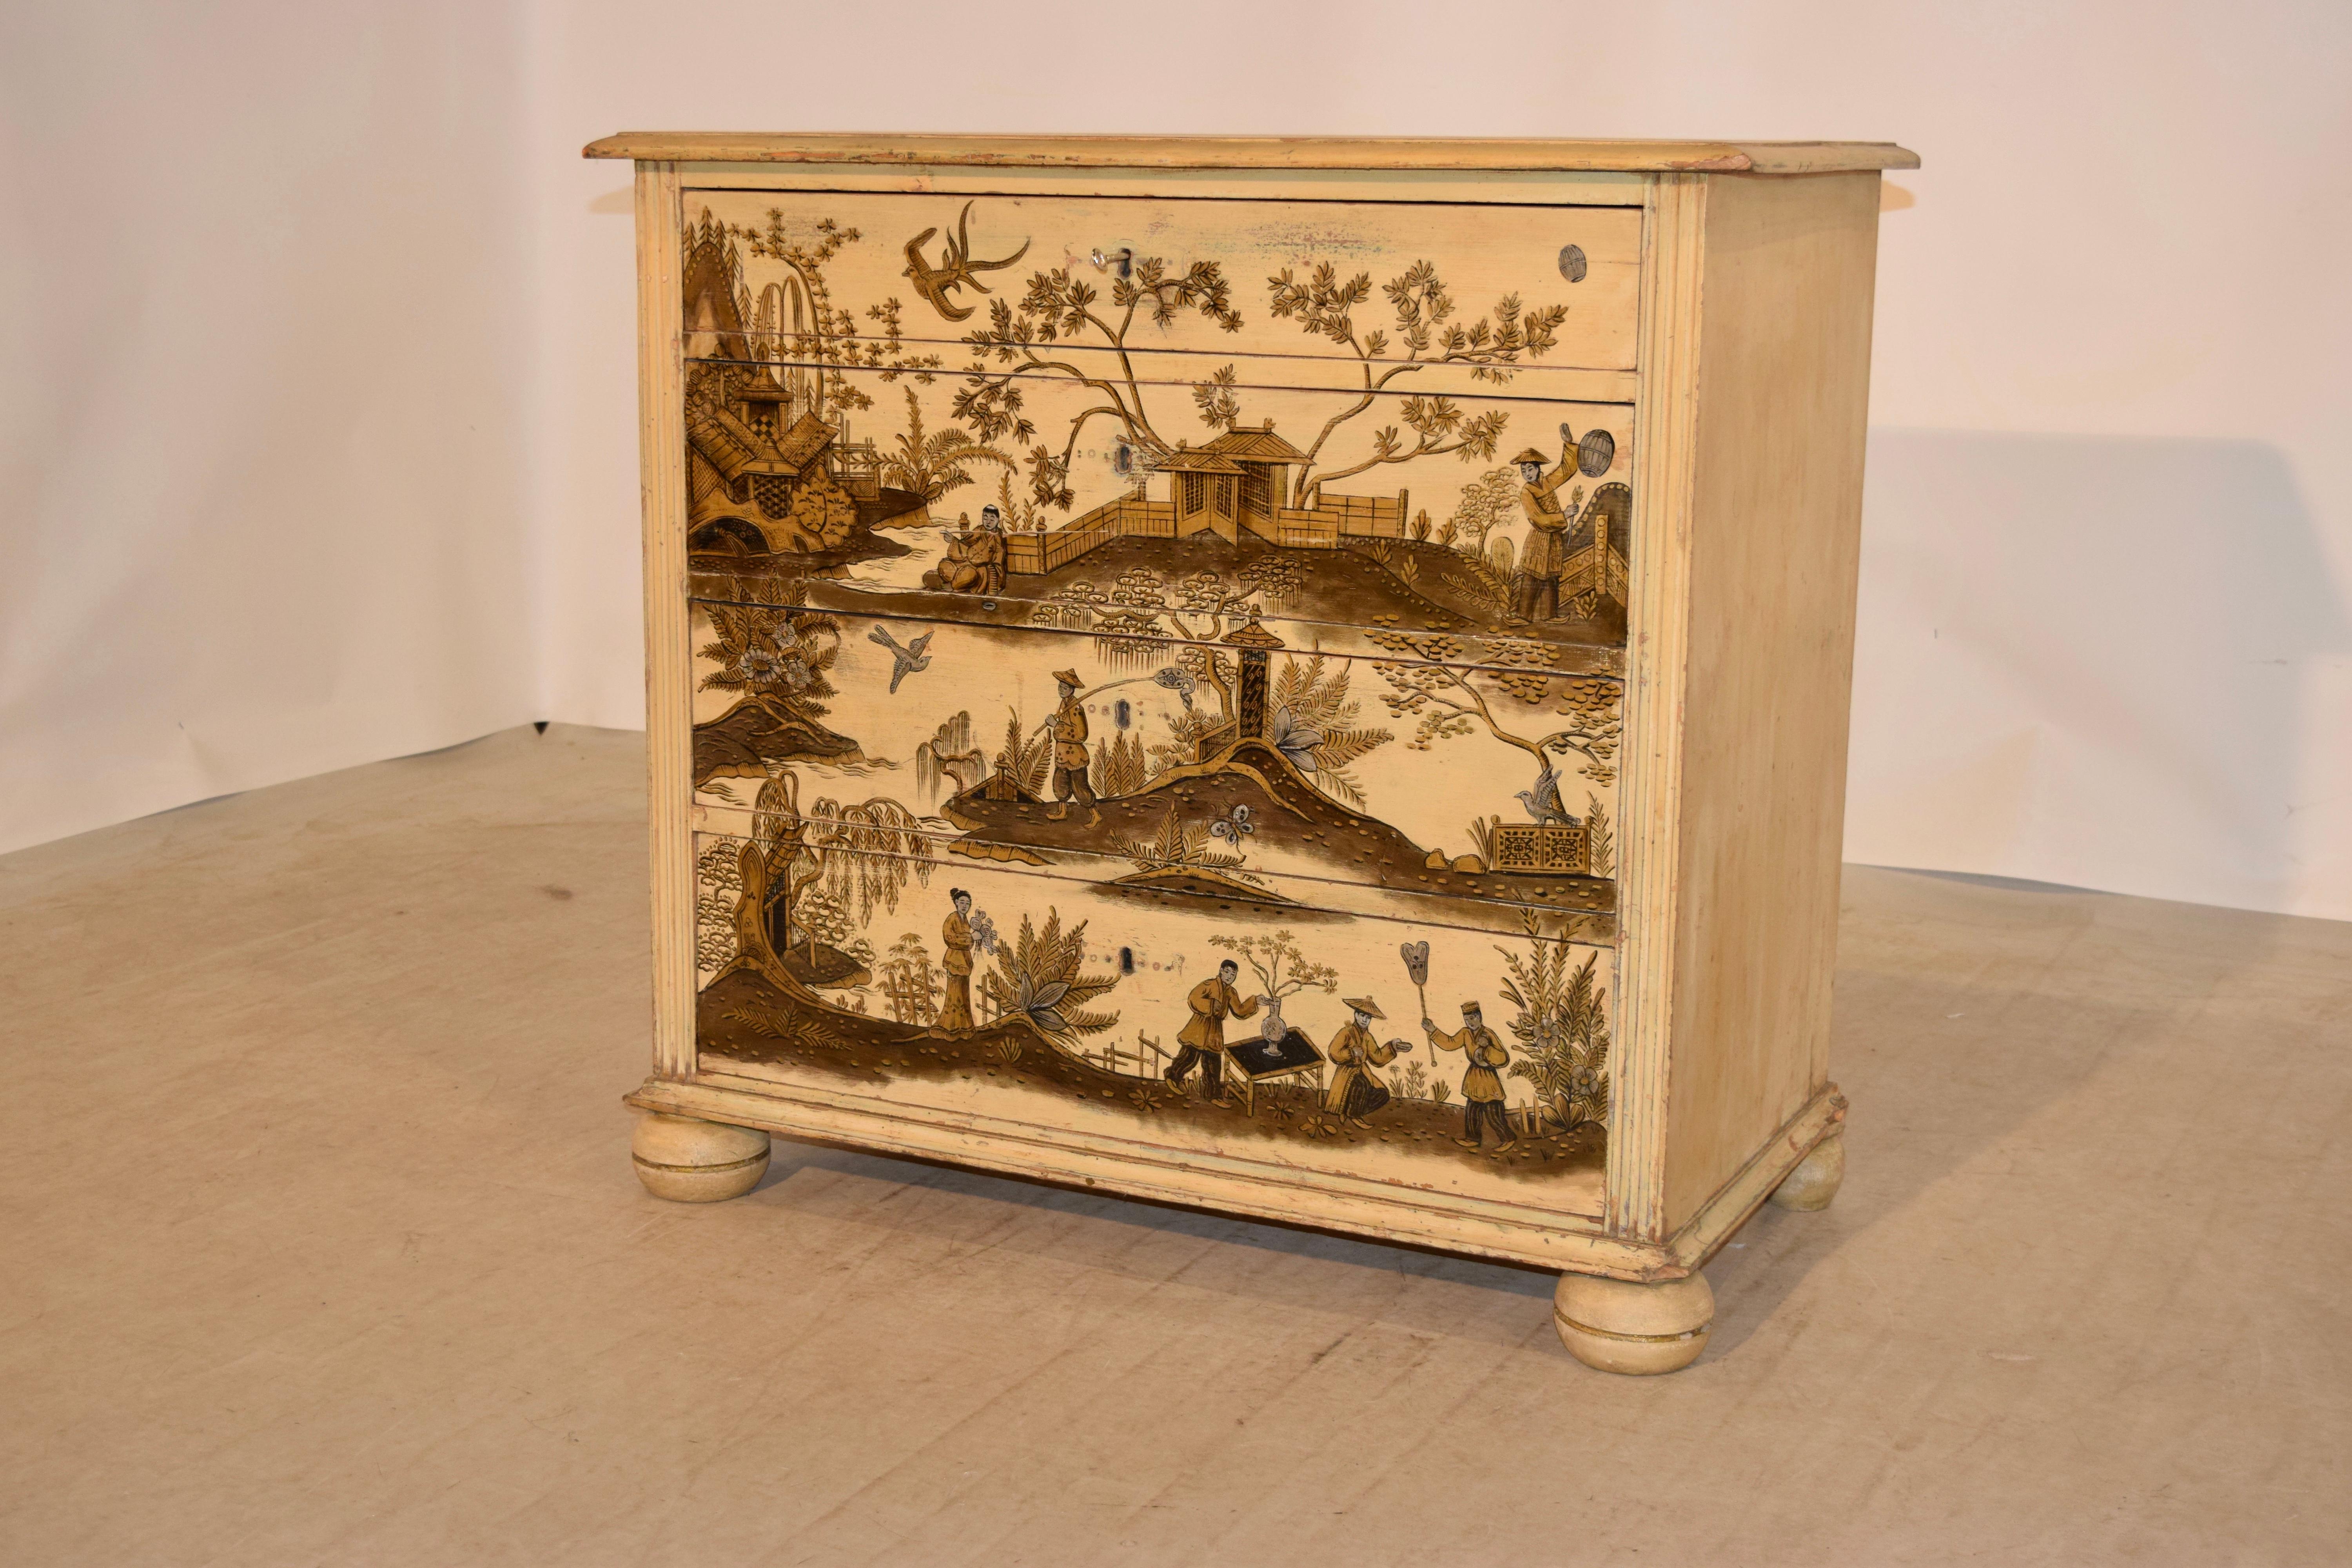 19th century English chest of drawers with a beveled edge around the top following down to reeded columns flanking four central drawers, supported on hand turned bun feet. The painting was added at a later date. The chest has a single key.